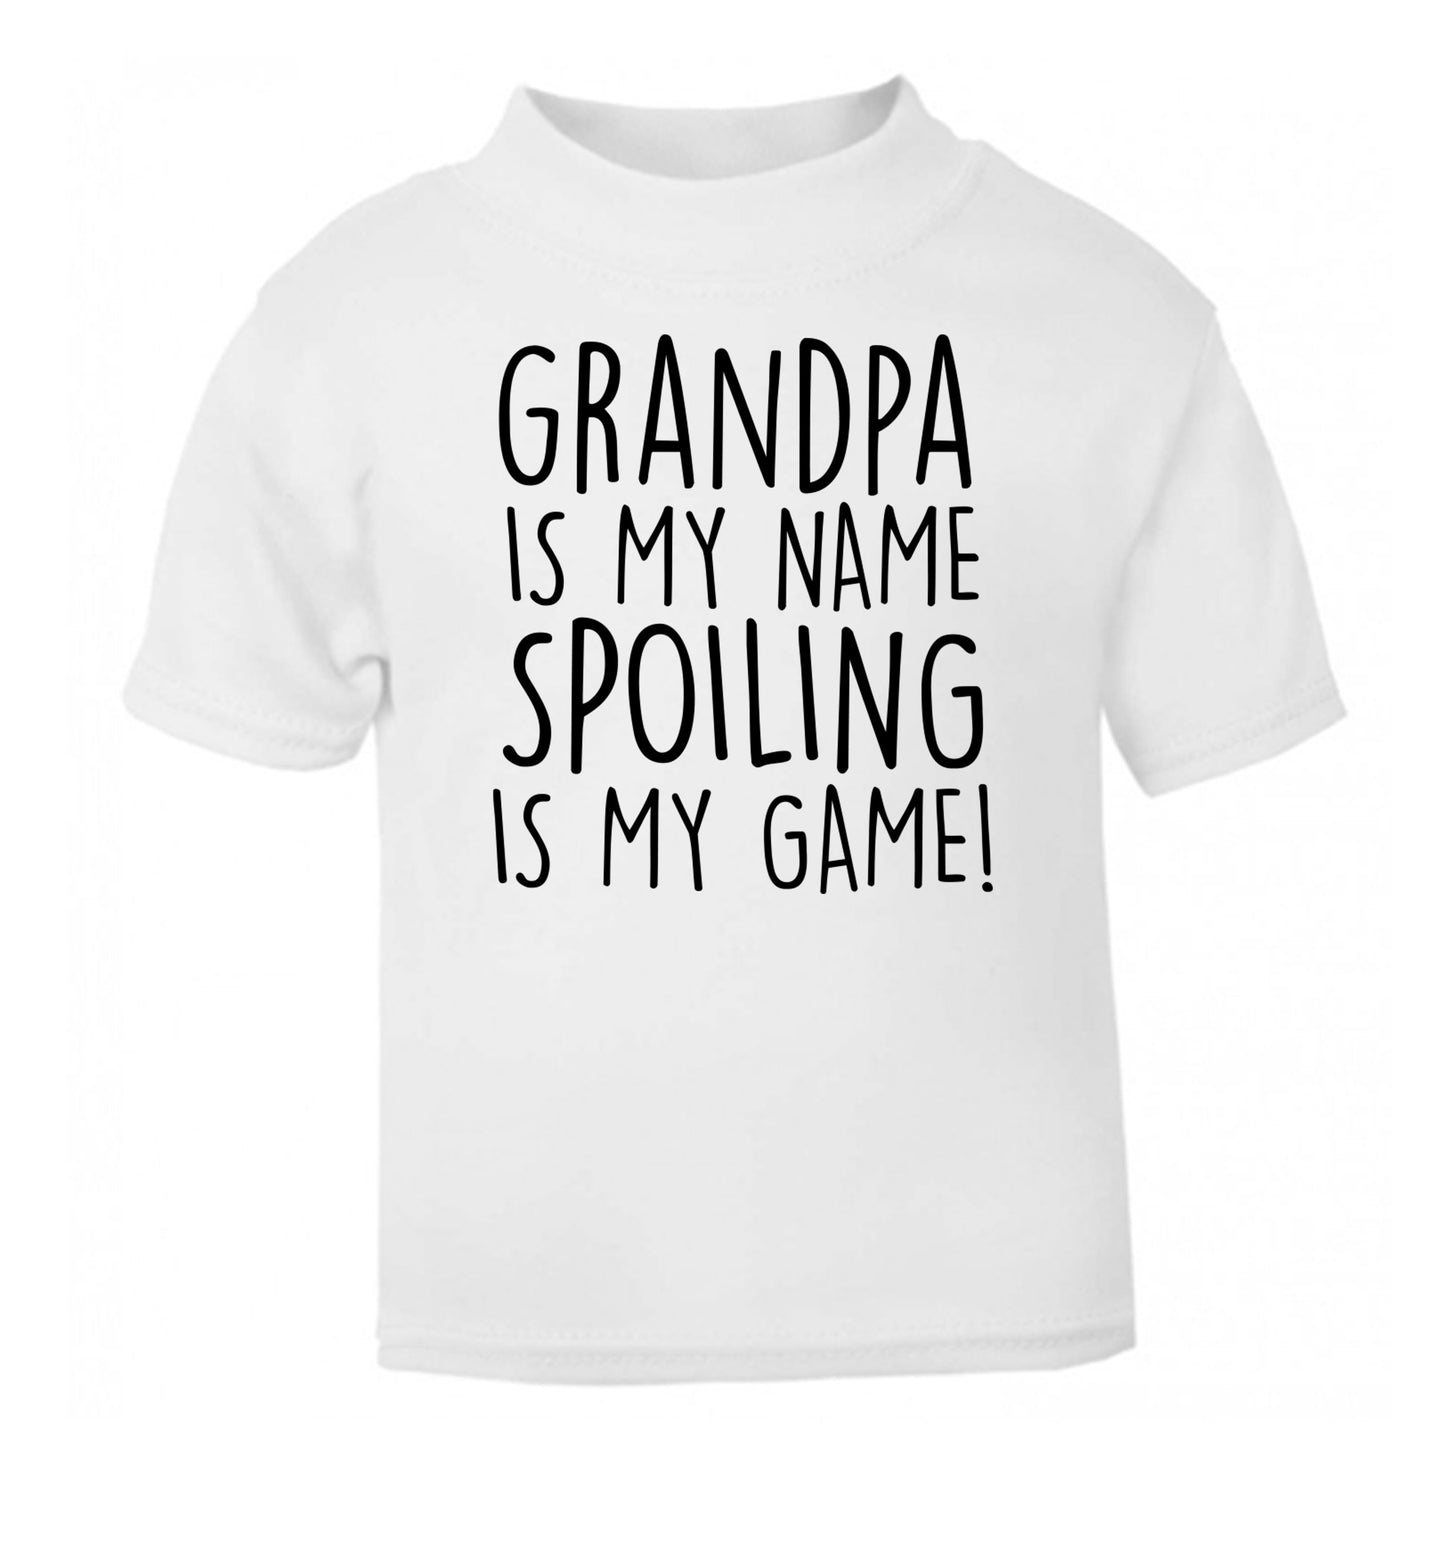 Grandpa is my name, spoiling is my game white Baby Toddler Tshirt 2 Years